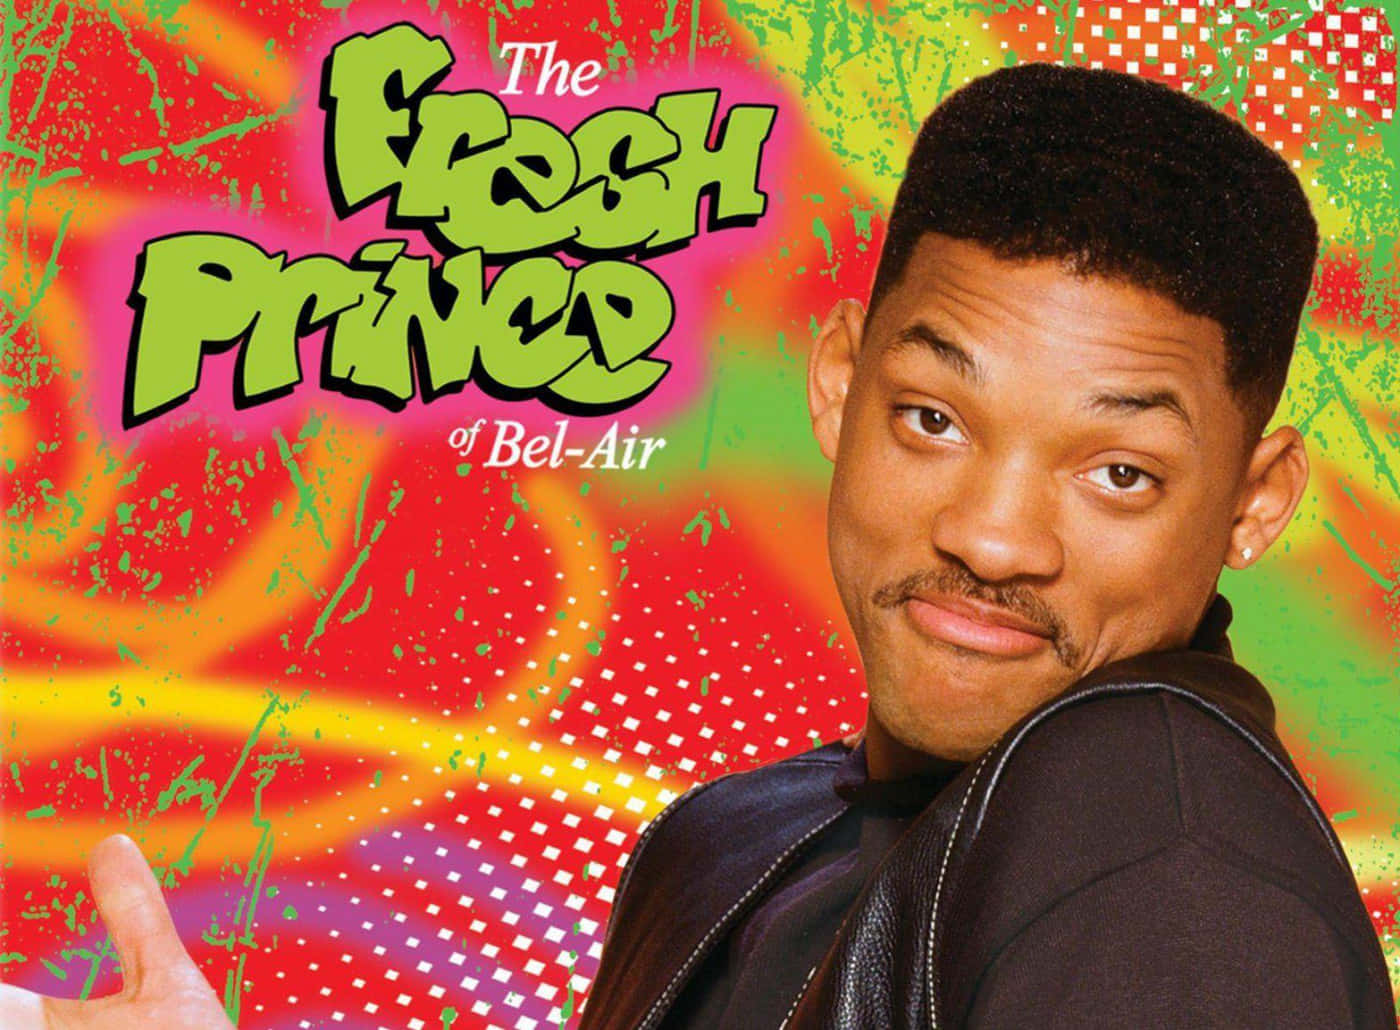 Definitive 90s style: Fresh Prince of Bel-Air